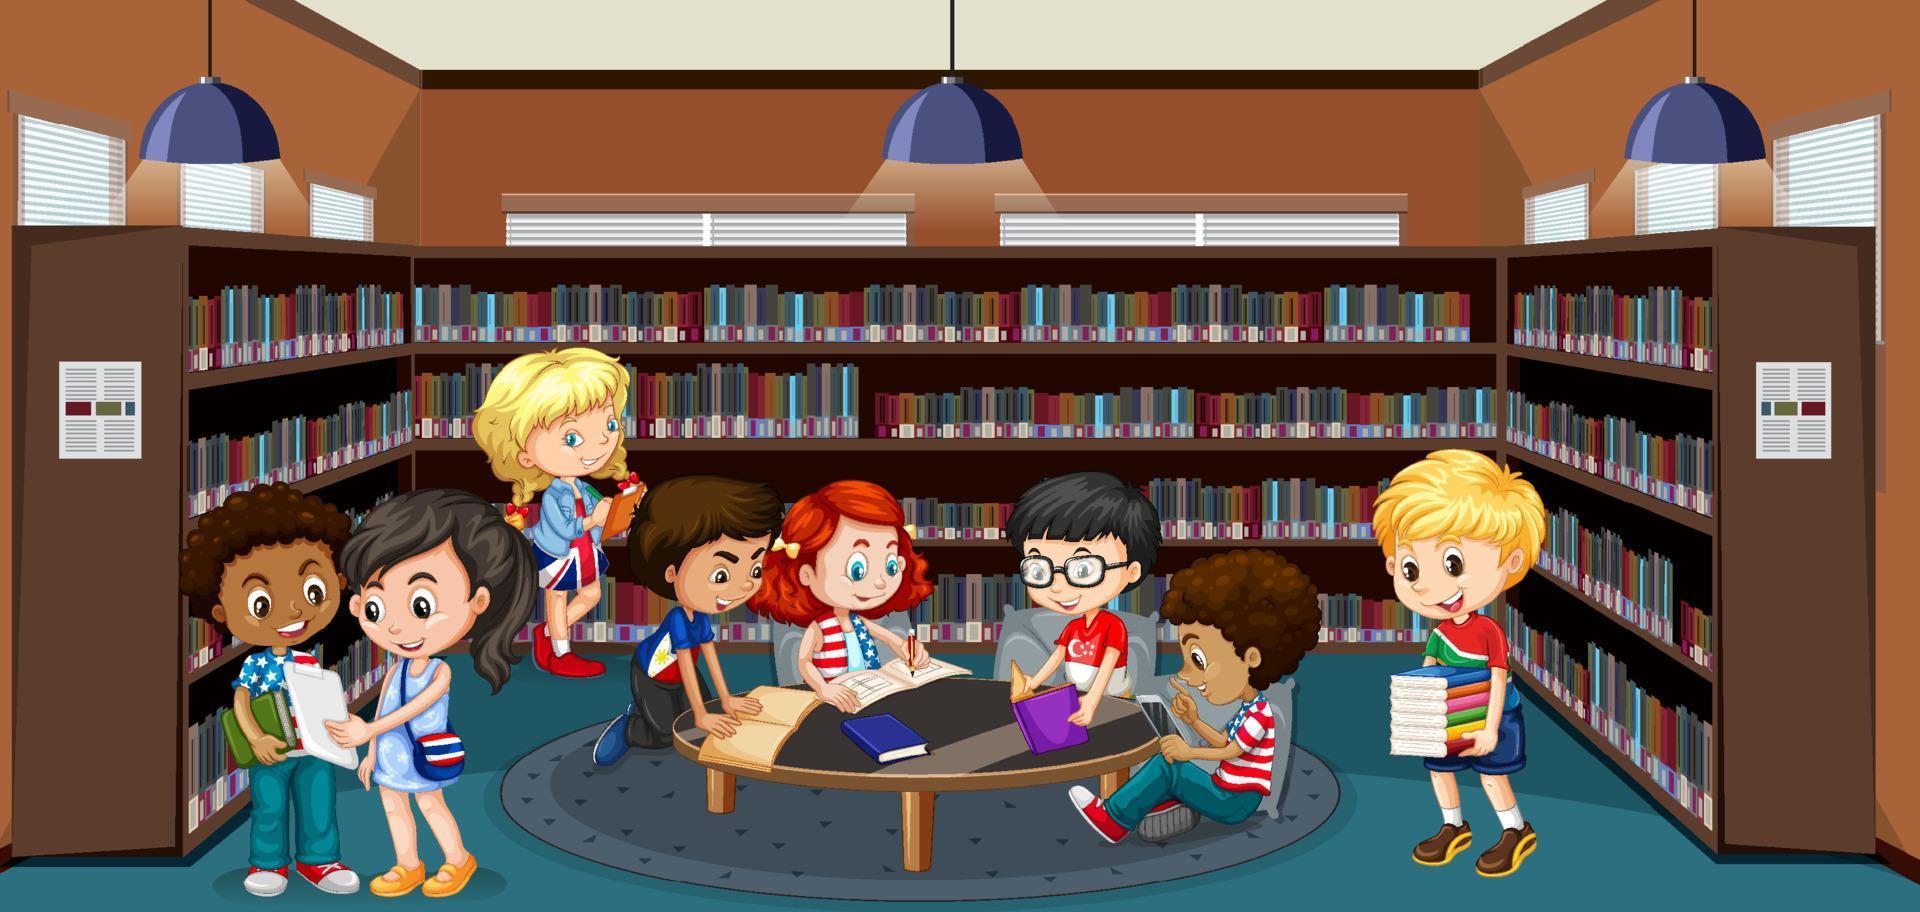 School library interior with children group vector